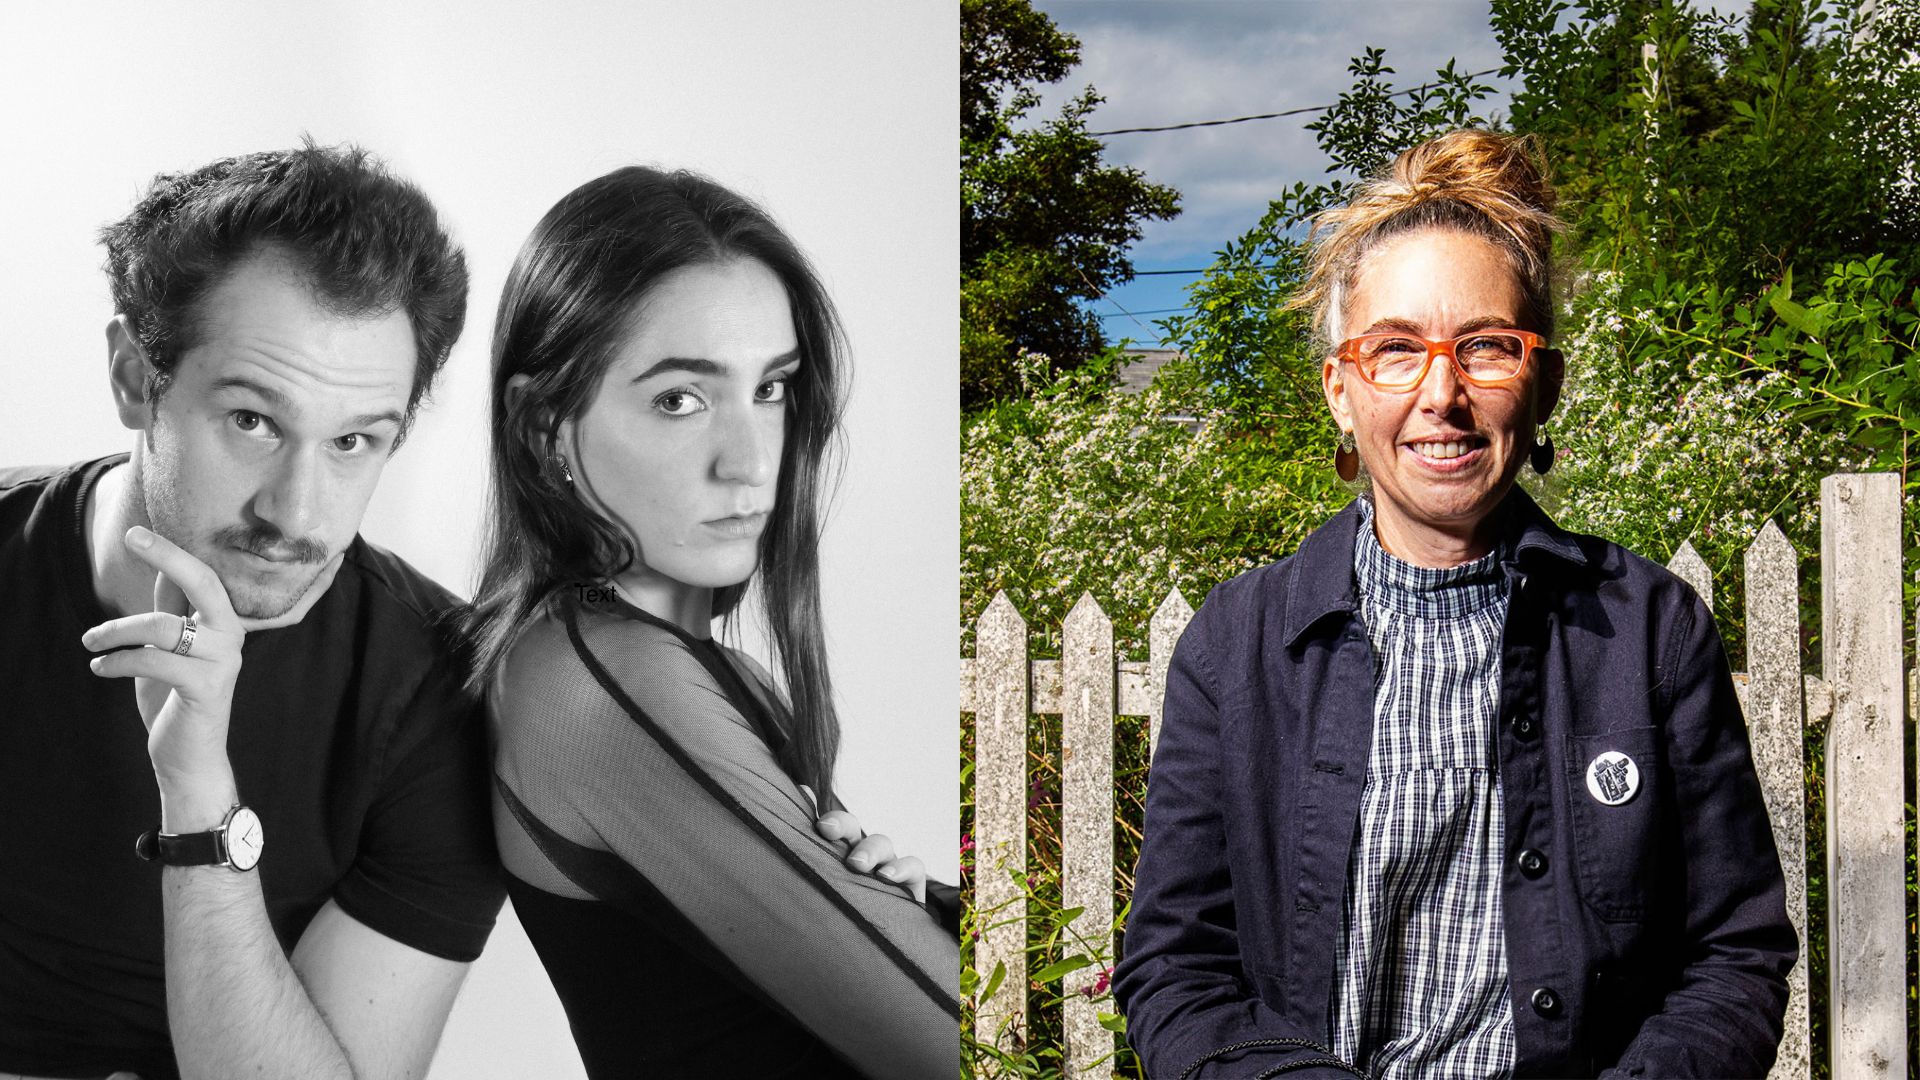 Two photographs side by side: Ahmed Ragheb and Lily Ekimian Ragheb sitting side by side in a black and white photograph. Kathryn Ramey, a white woman in her 50’s with long gray blond hair in a bun wearing a black and white plaid mock turtle-neck blouse and a black cotton blazer and pink glasses sits smiling facing the camera in front of a white picket fence with green trees and blue sky in the background. This photo was taken at Camden Film Festival.